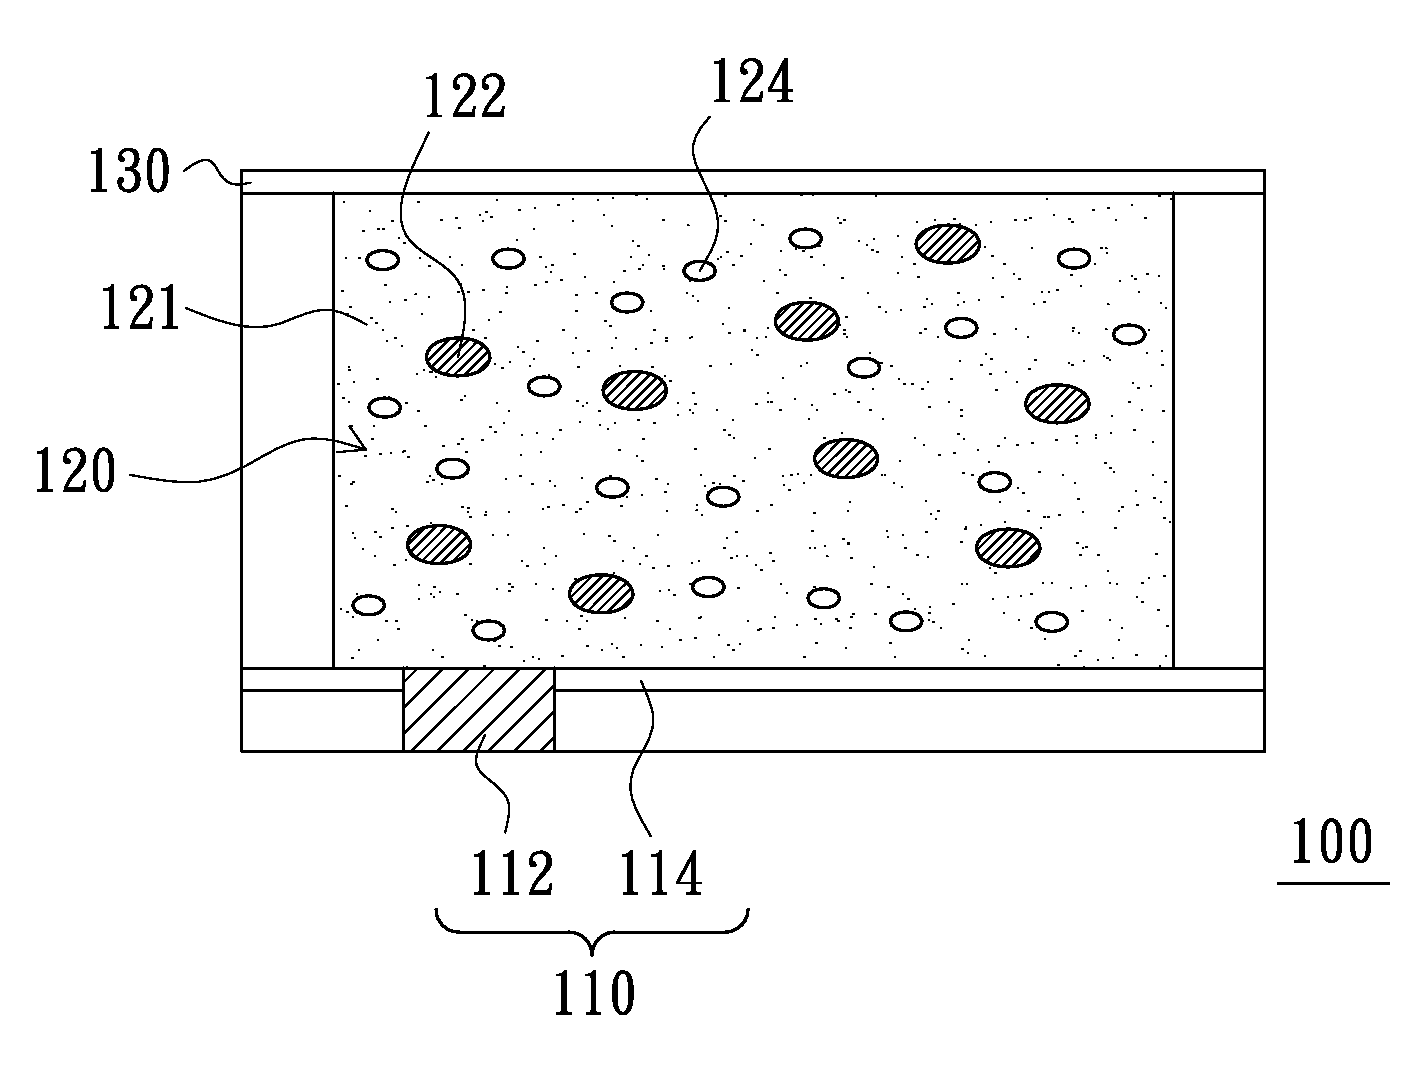 Sub-Pixel Structure and Pixel Structure of Color Electrophoretic Display